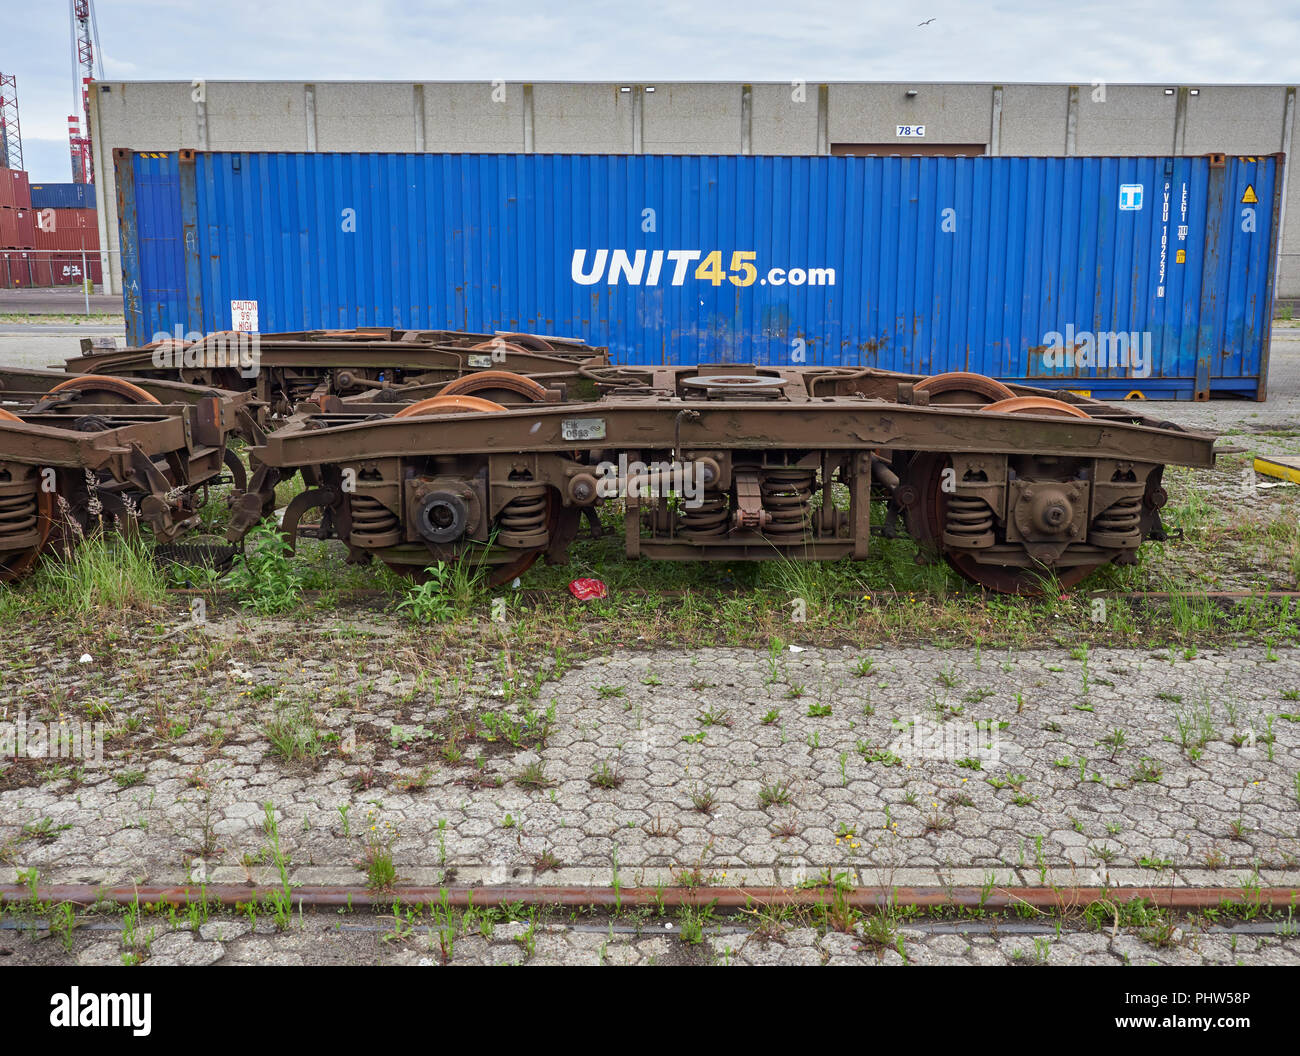 Old Train Bogies taken from dismantled Trains on tracks at Container Port in Amsterdam, The Netherlands. Stock Photo